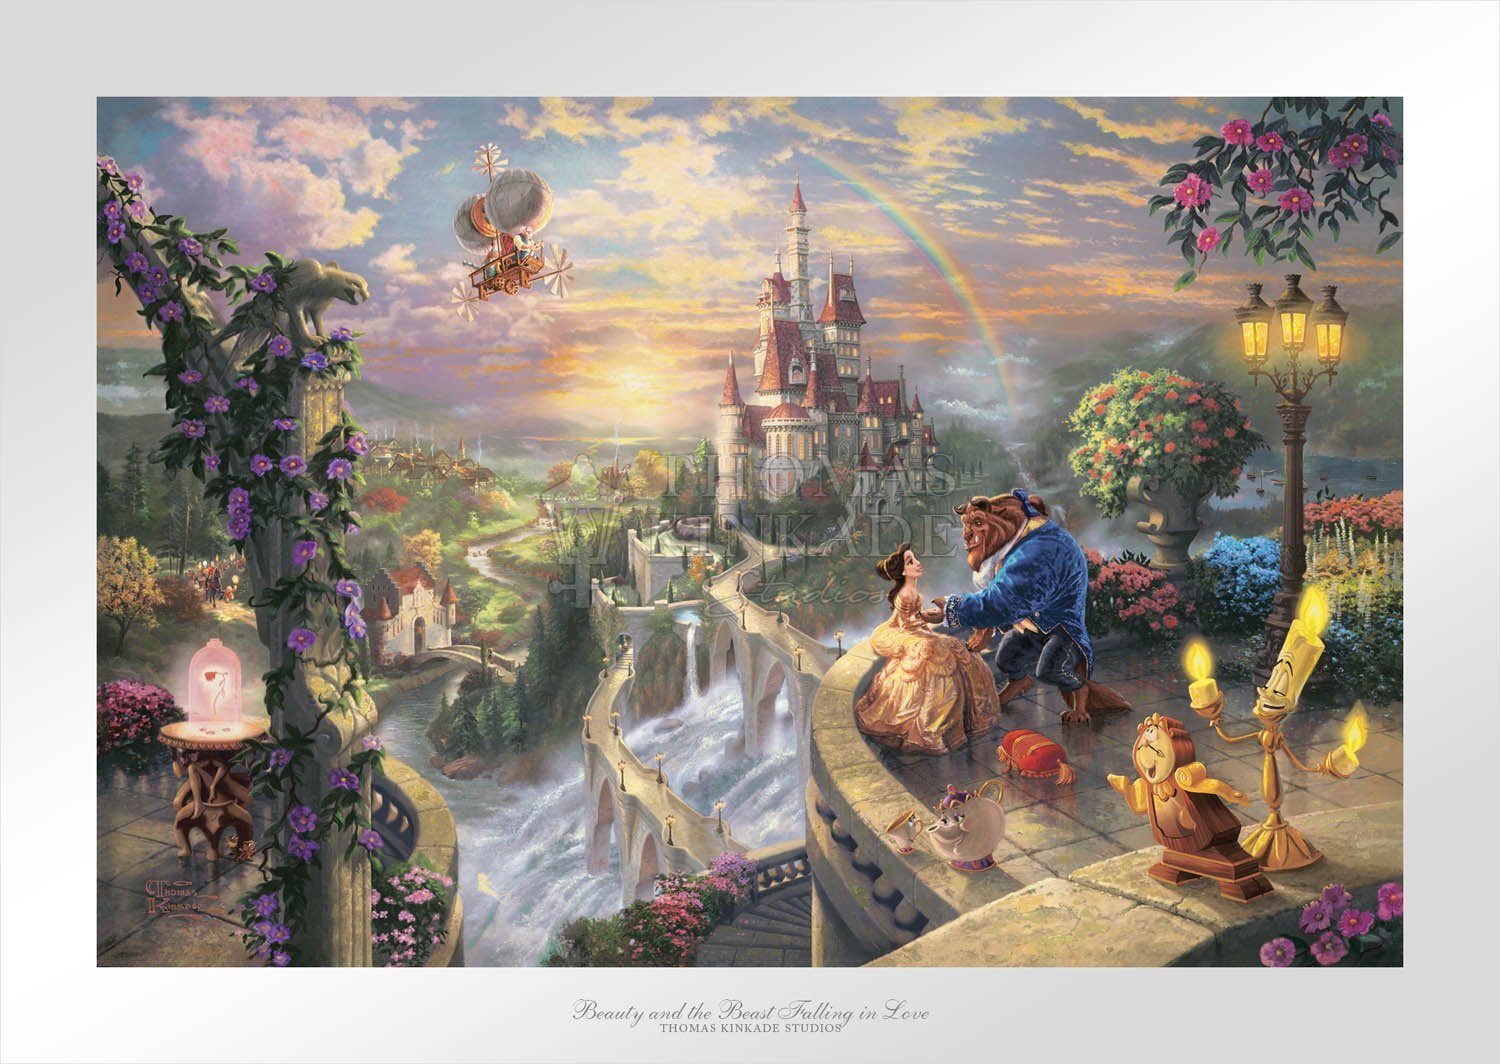 Beauty and the Beast Falling in Love by Thomas Kinkade Studios. This scene has depicted the story from the townspeople, Belle and the Beast upon the castle's veranda with Cogsworth, Mrs. Potts, and of course, Lumiere gathered around.